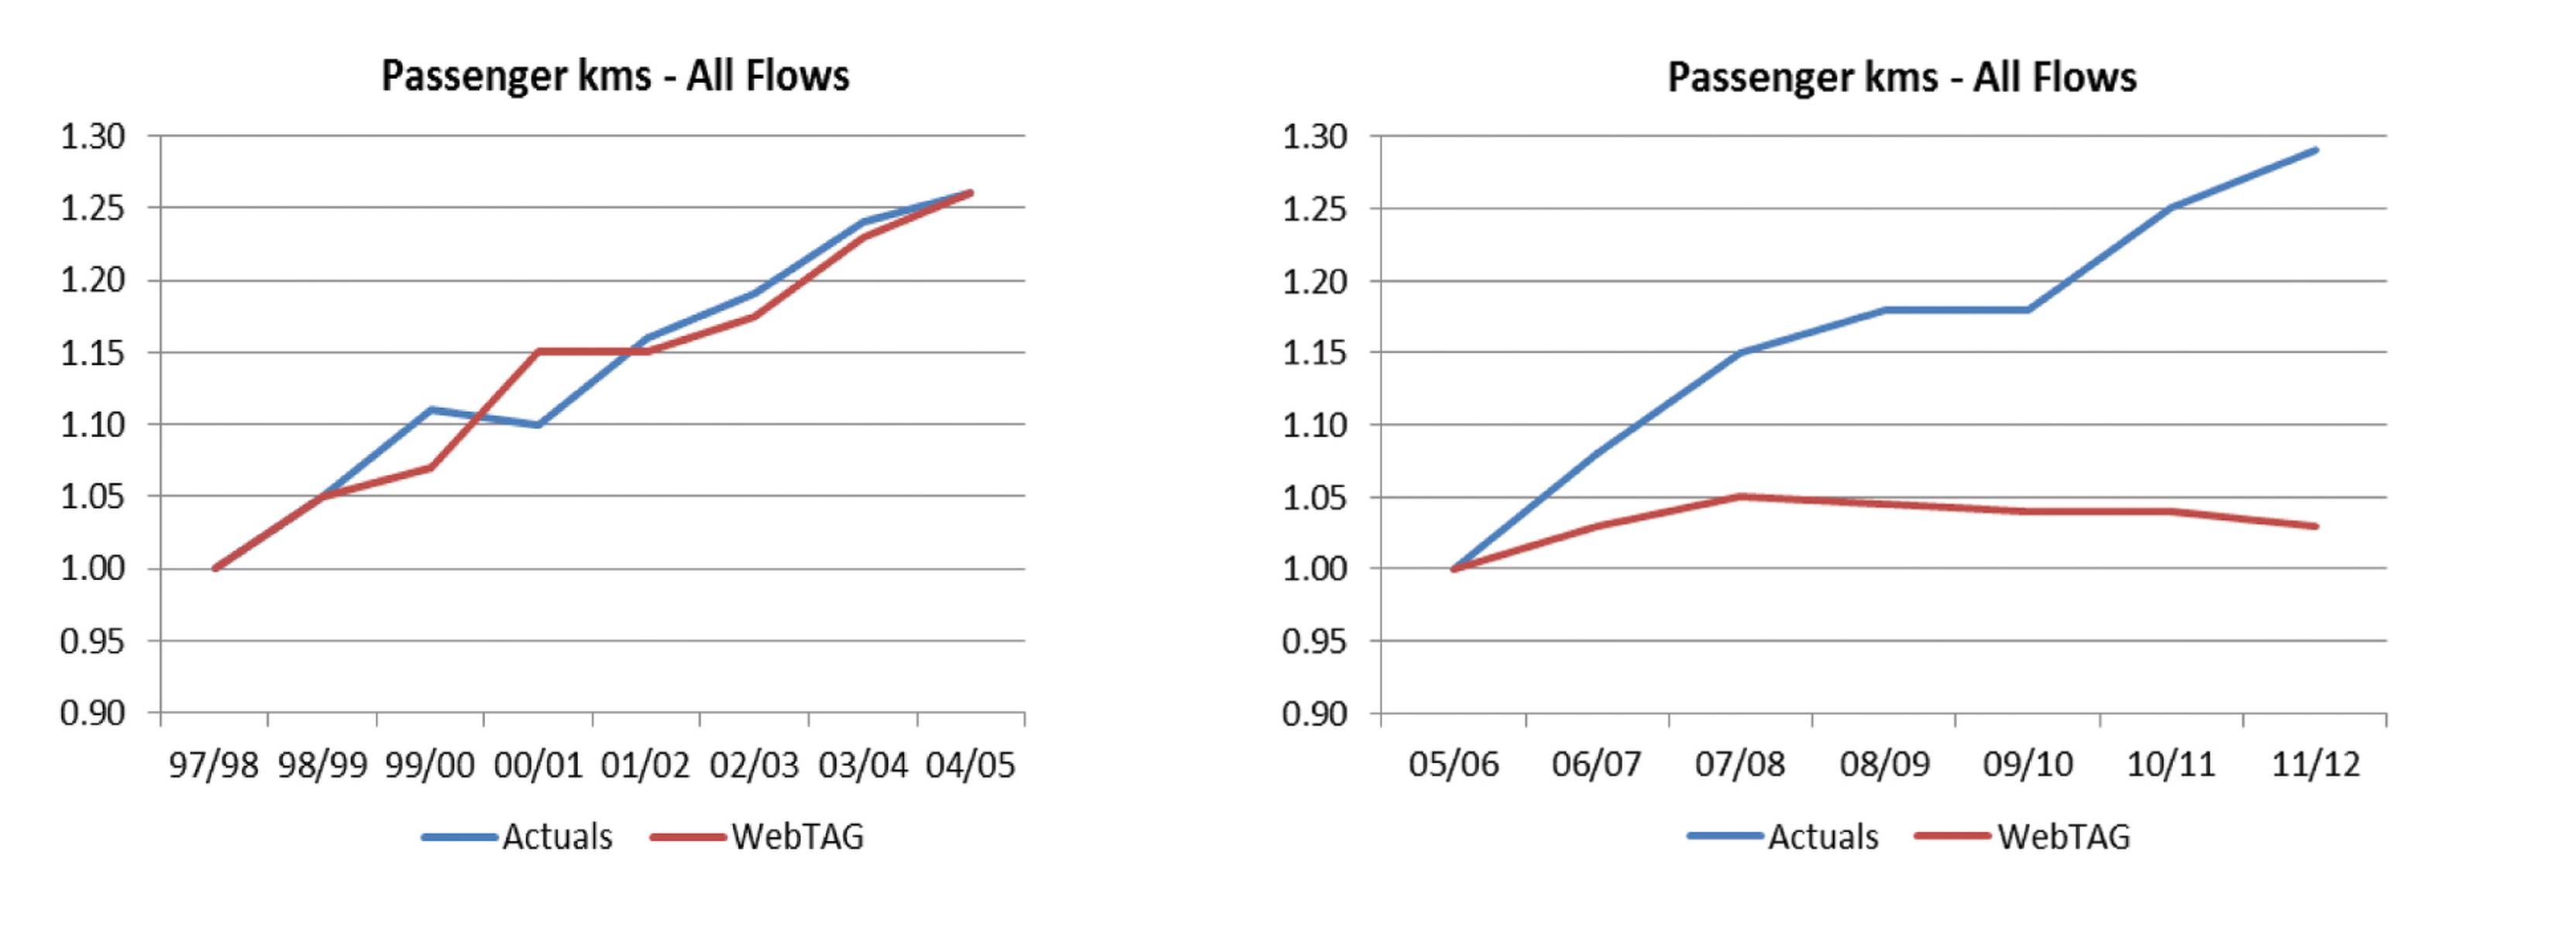 Rail demand has diverged from forecasts using WebTAG (and PDFH) recommendations